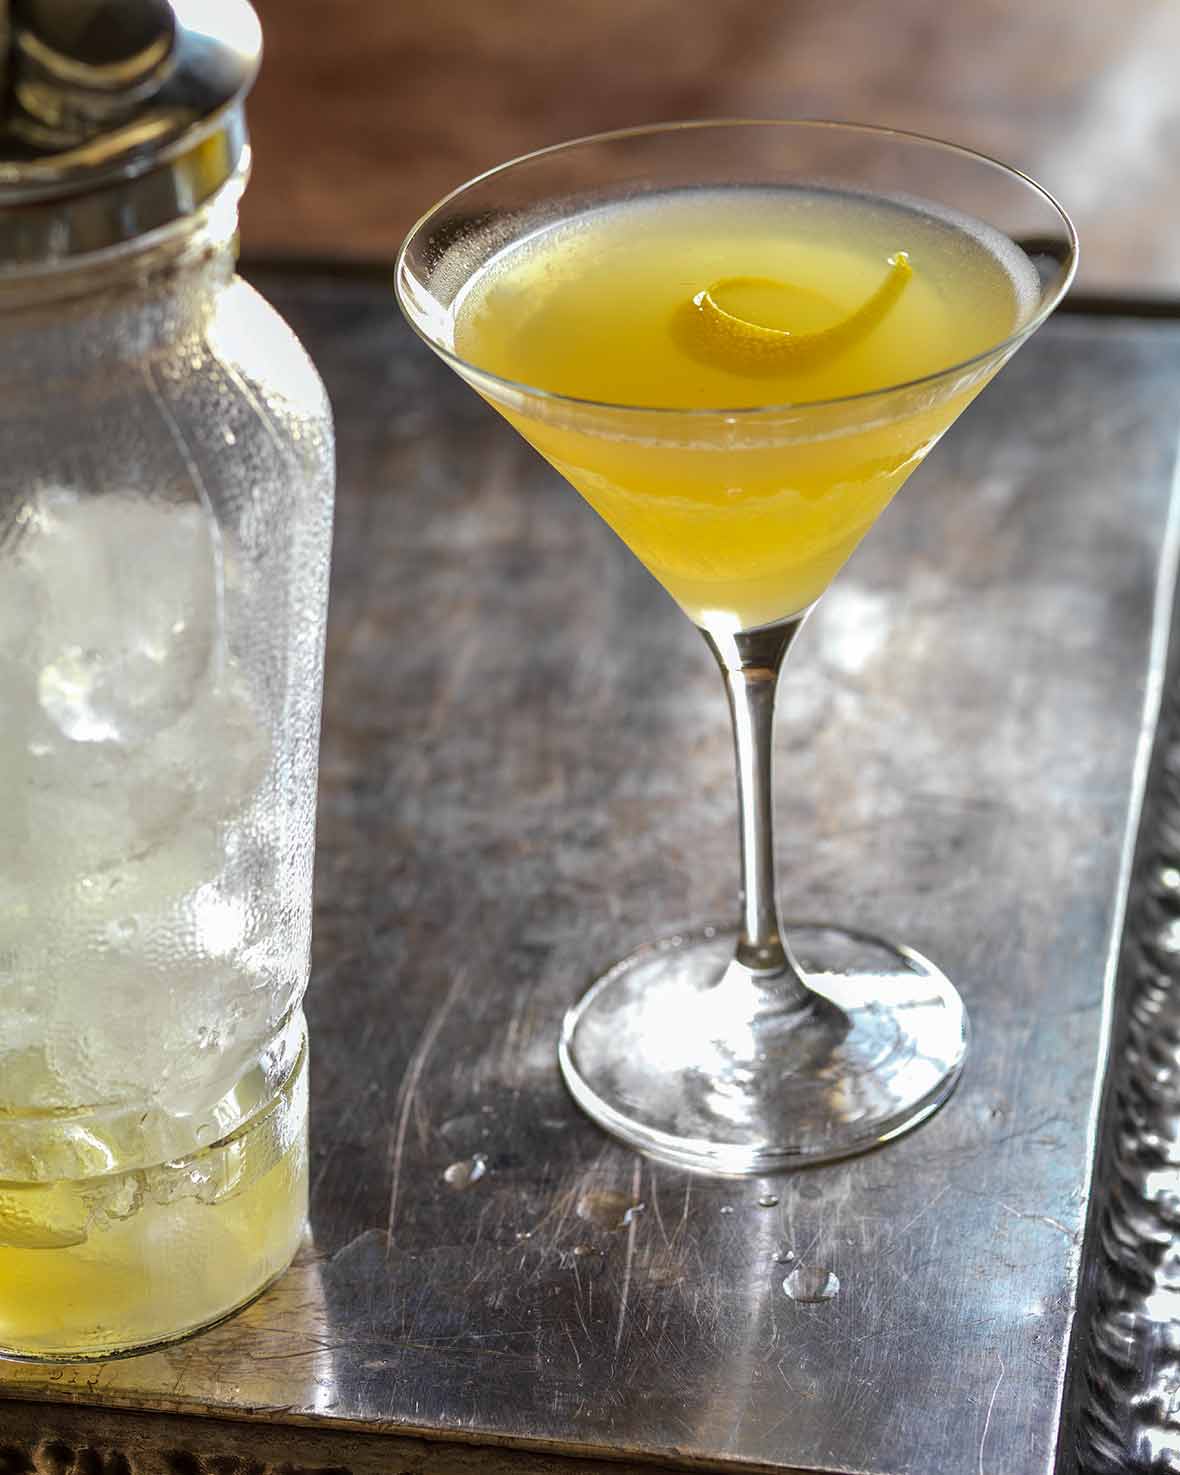 Martini glass filled with yellow Bee's Knees cocktail--honey, gin, and lemon--with a lemon twist, a shaker on the side